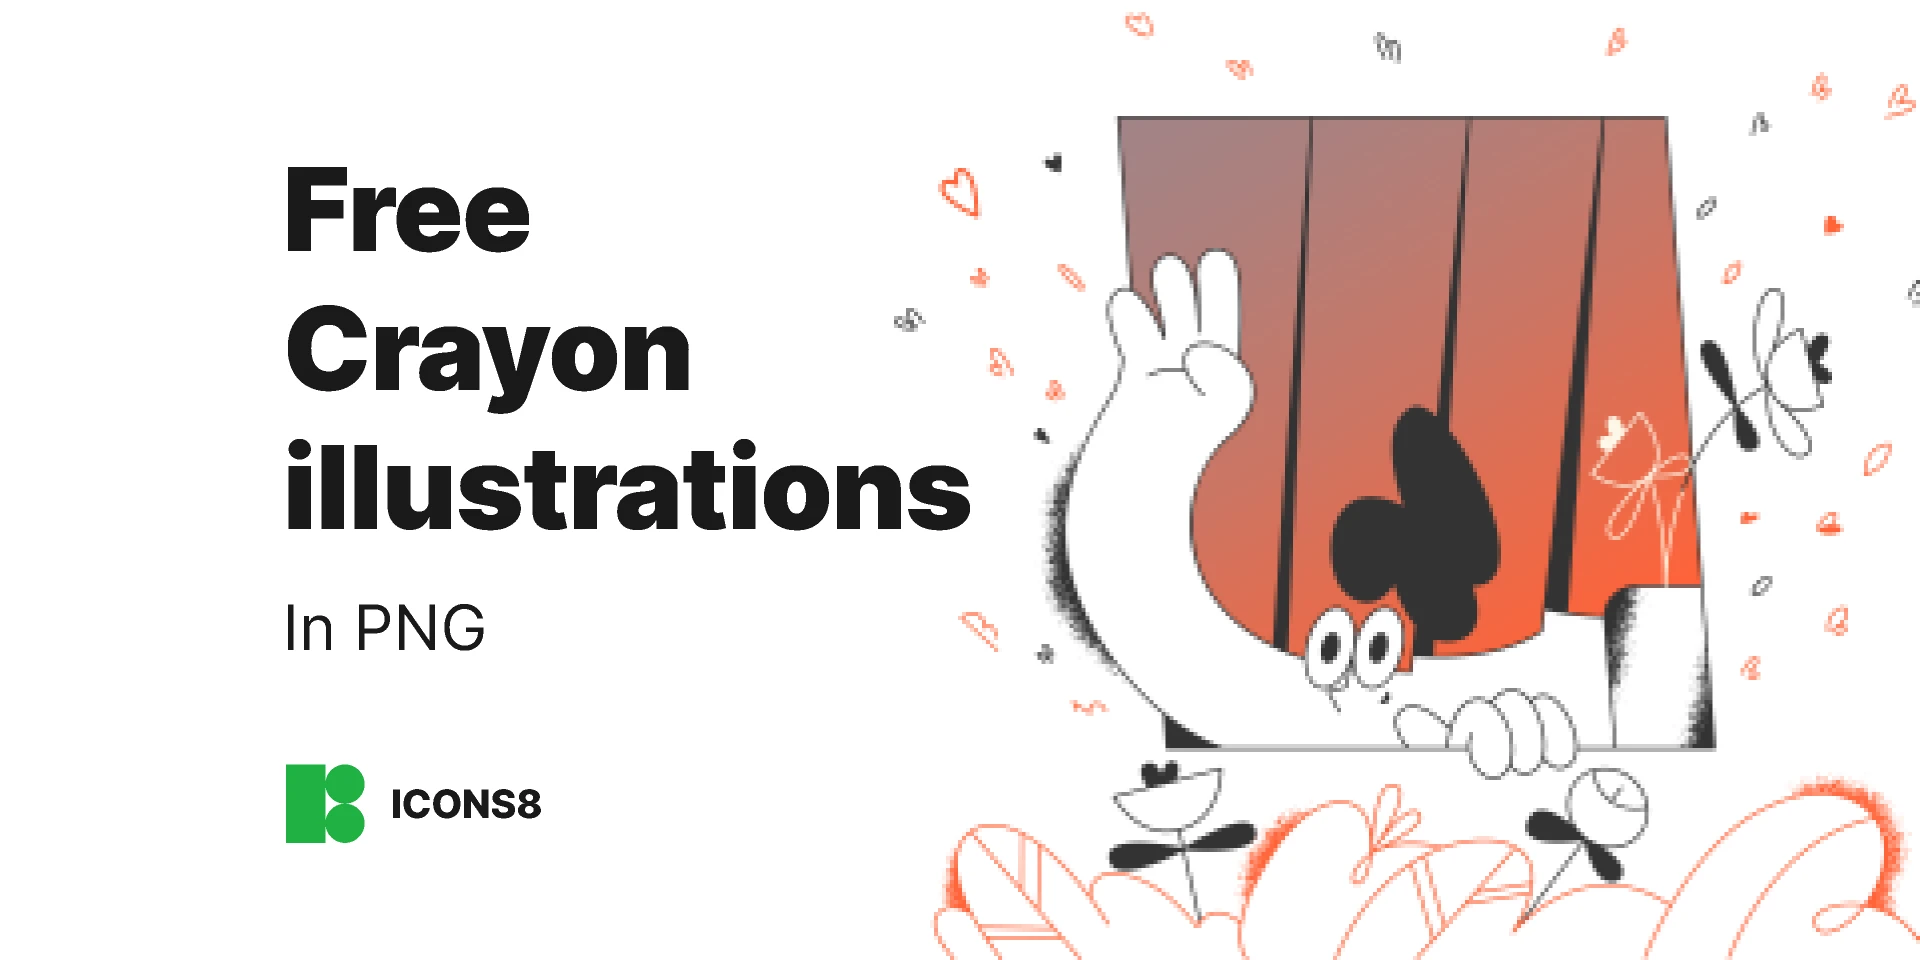 Free Crayon illustrations in PNG for Figma and Adobe XD